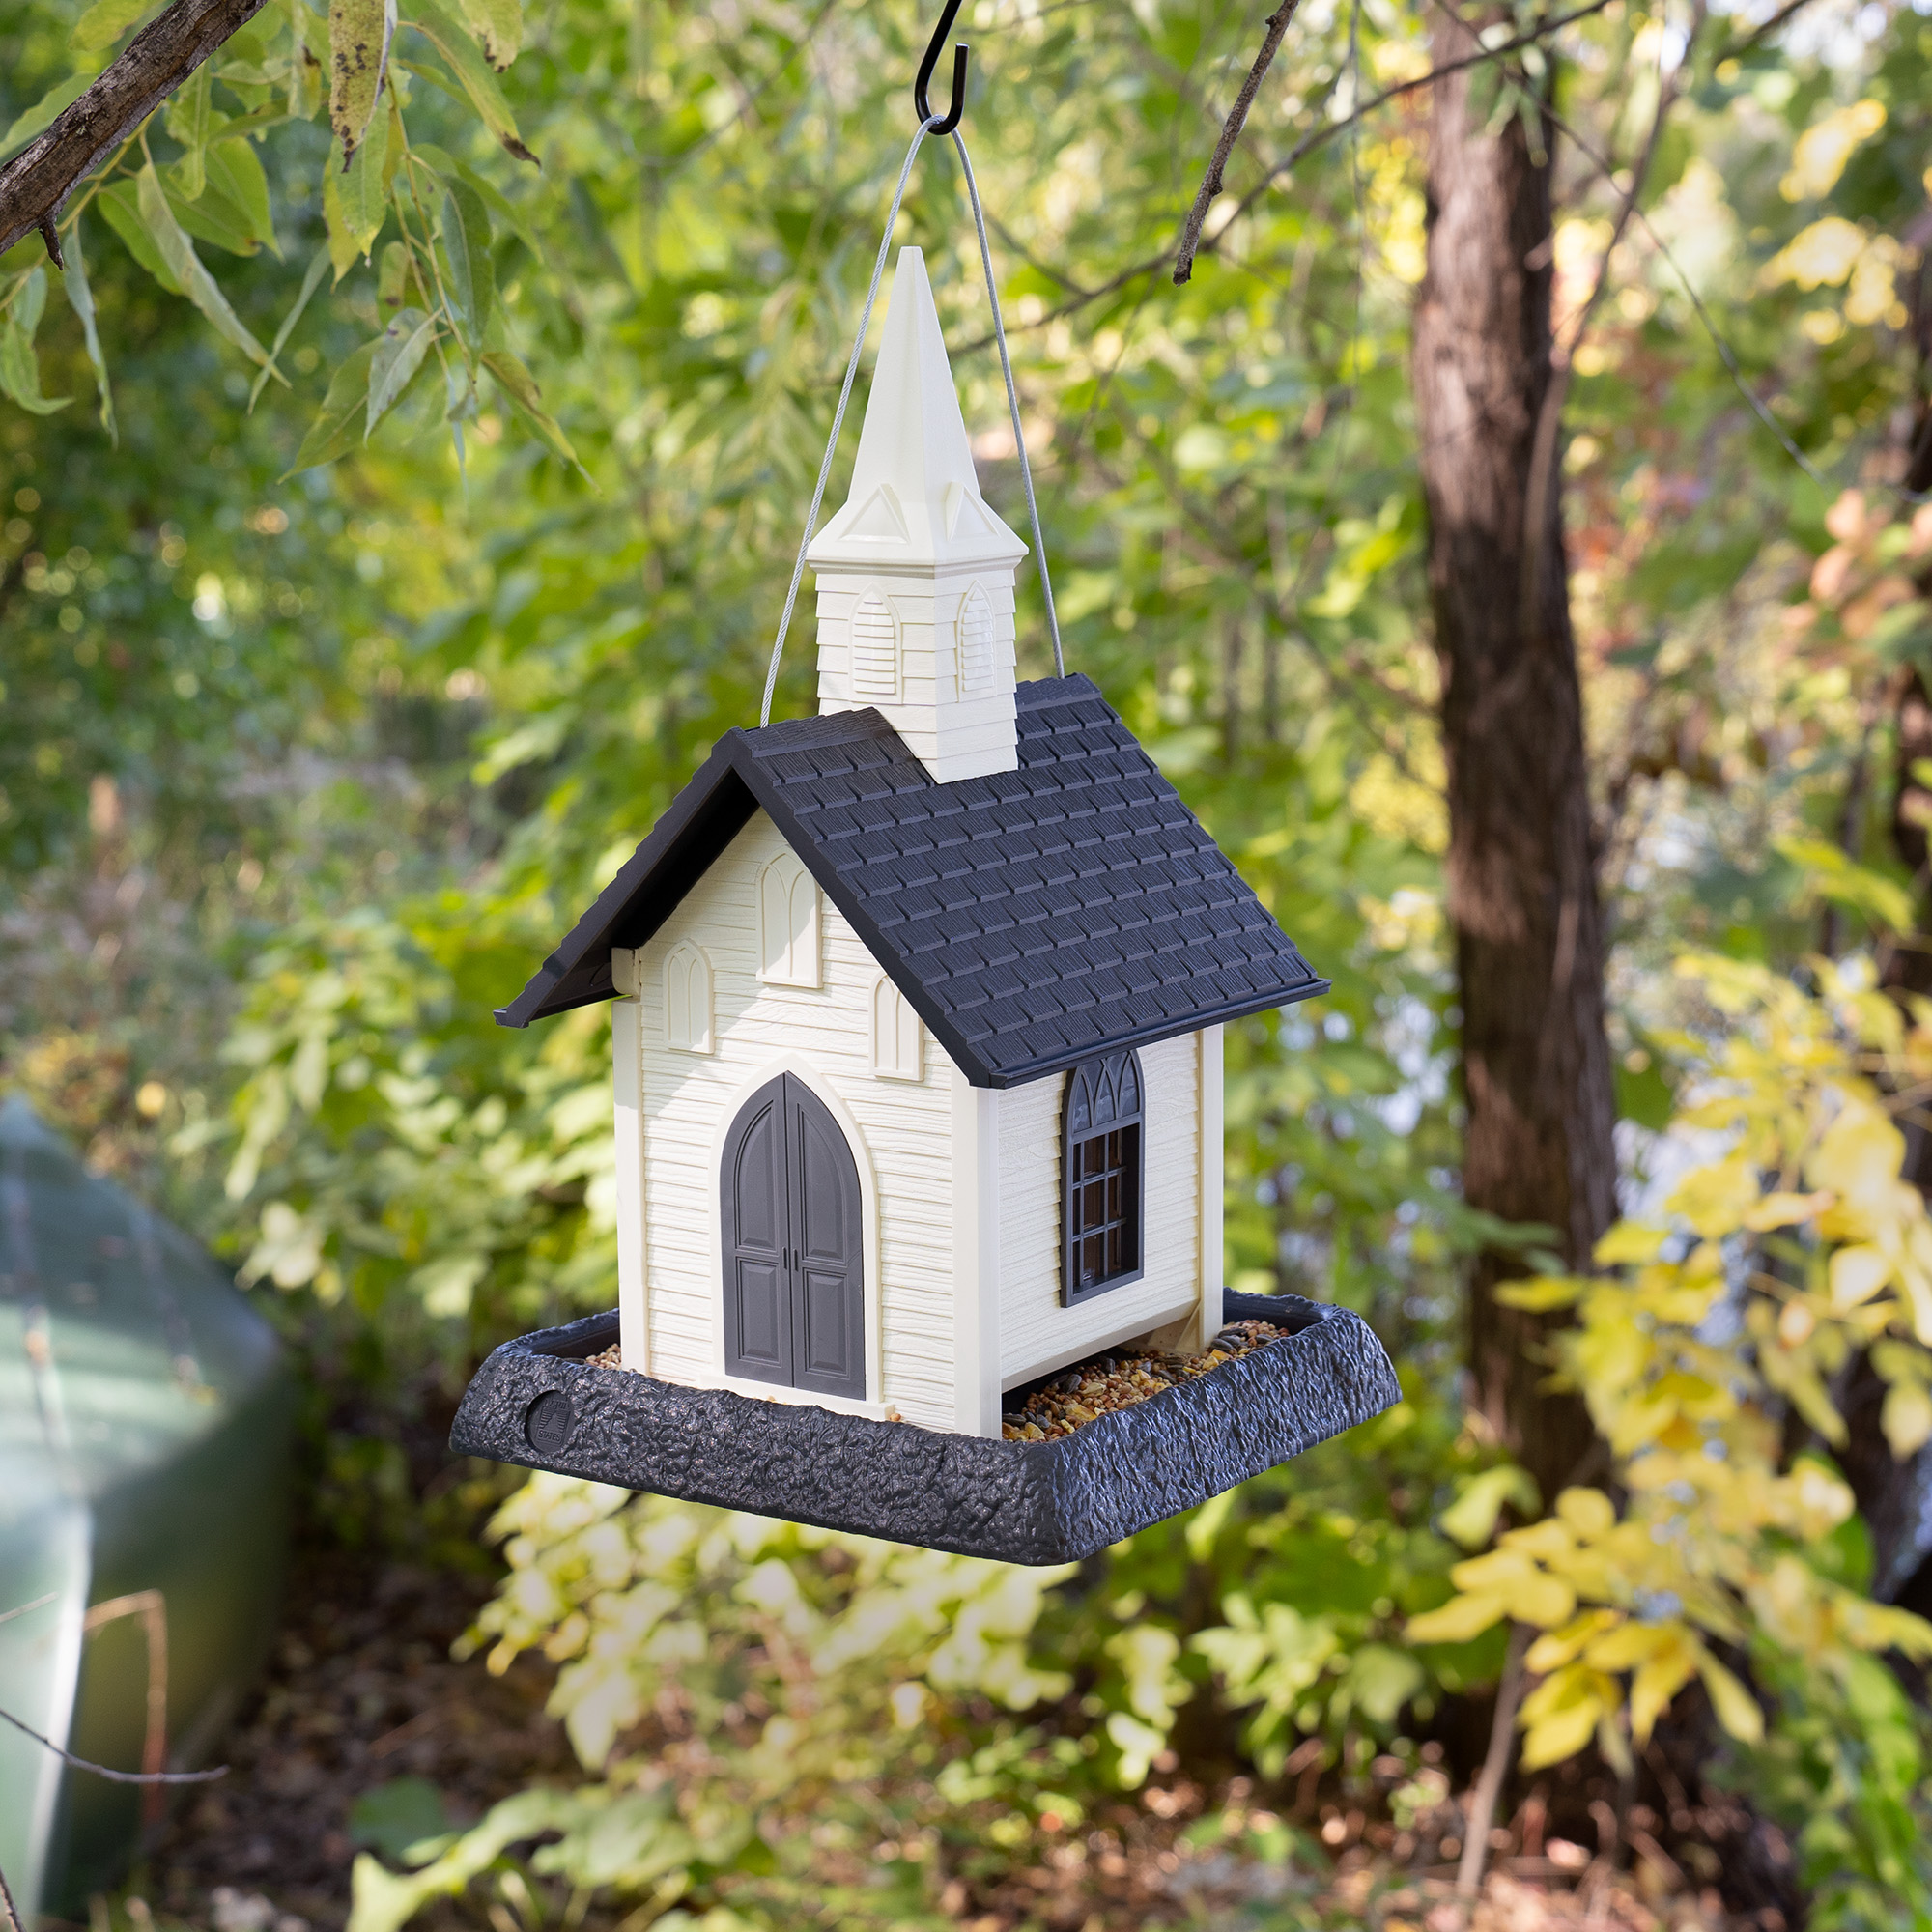 North States Village Collection White and Gray Church Hopper Bird Feeder, 5 lb Capacity - image 3 of 10